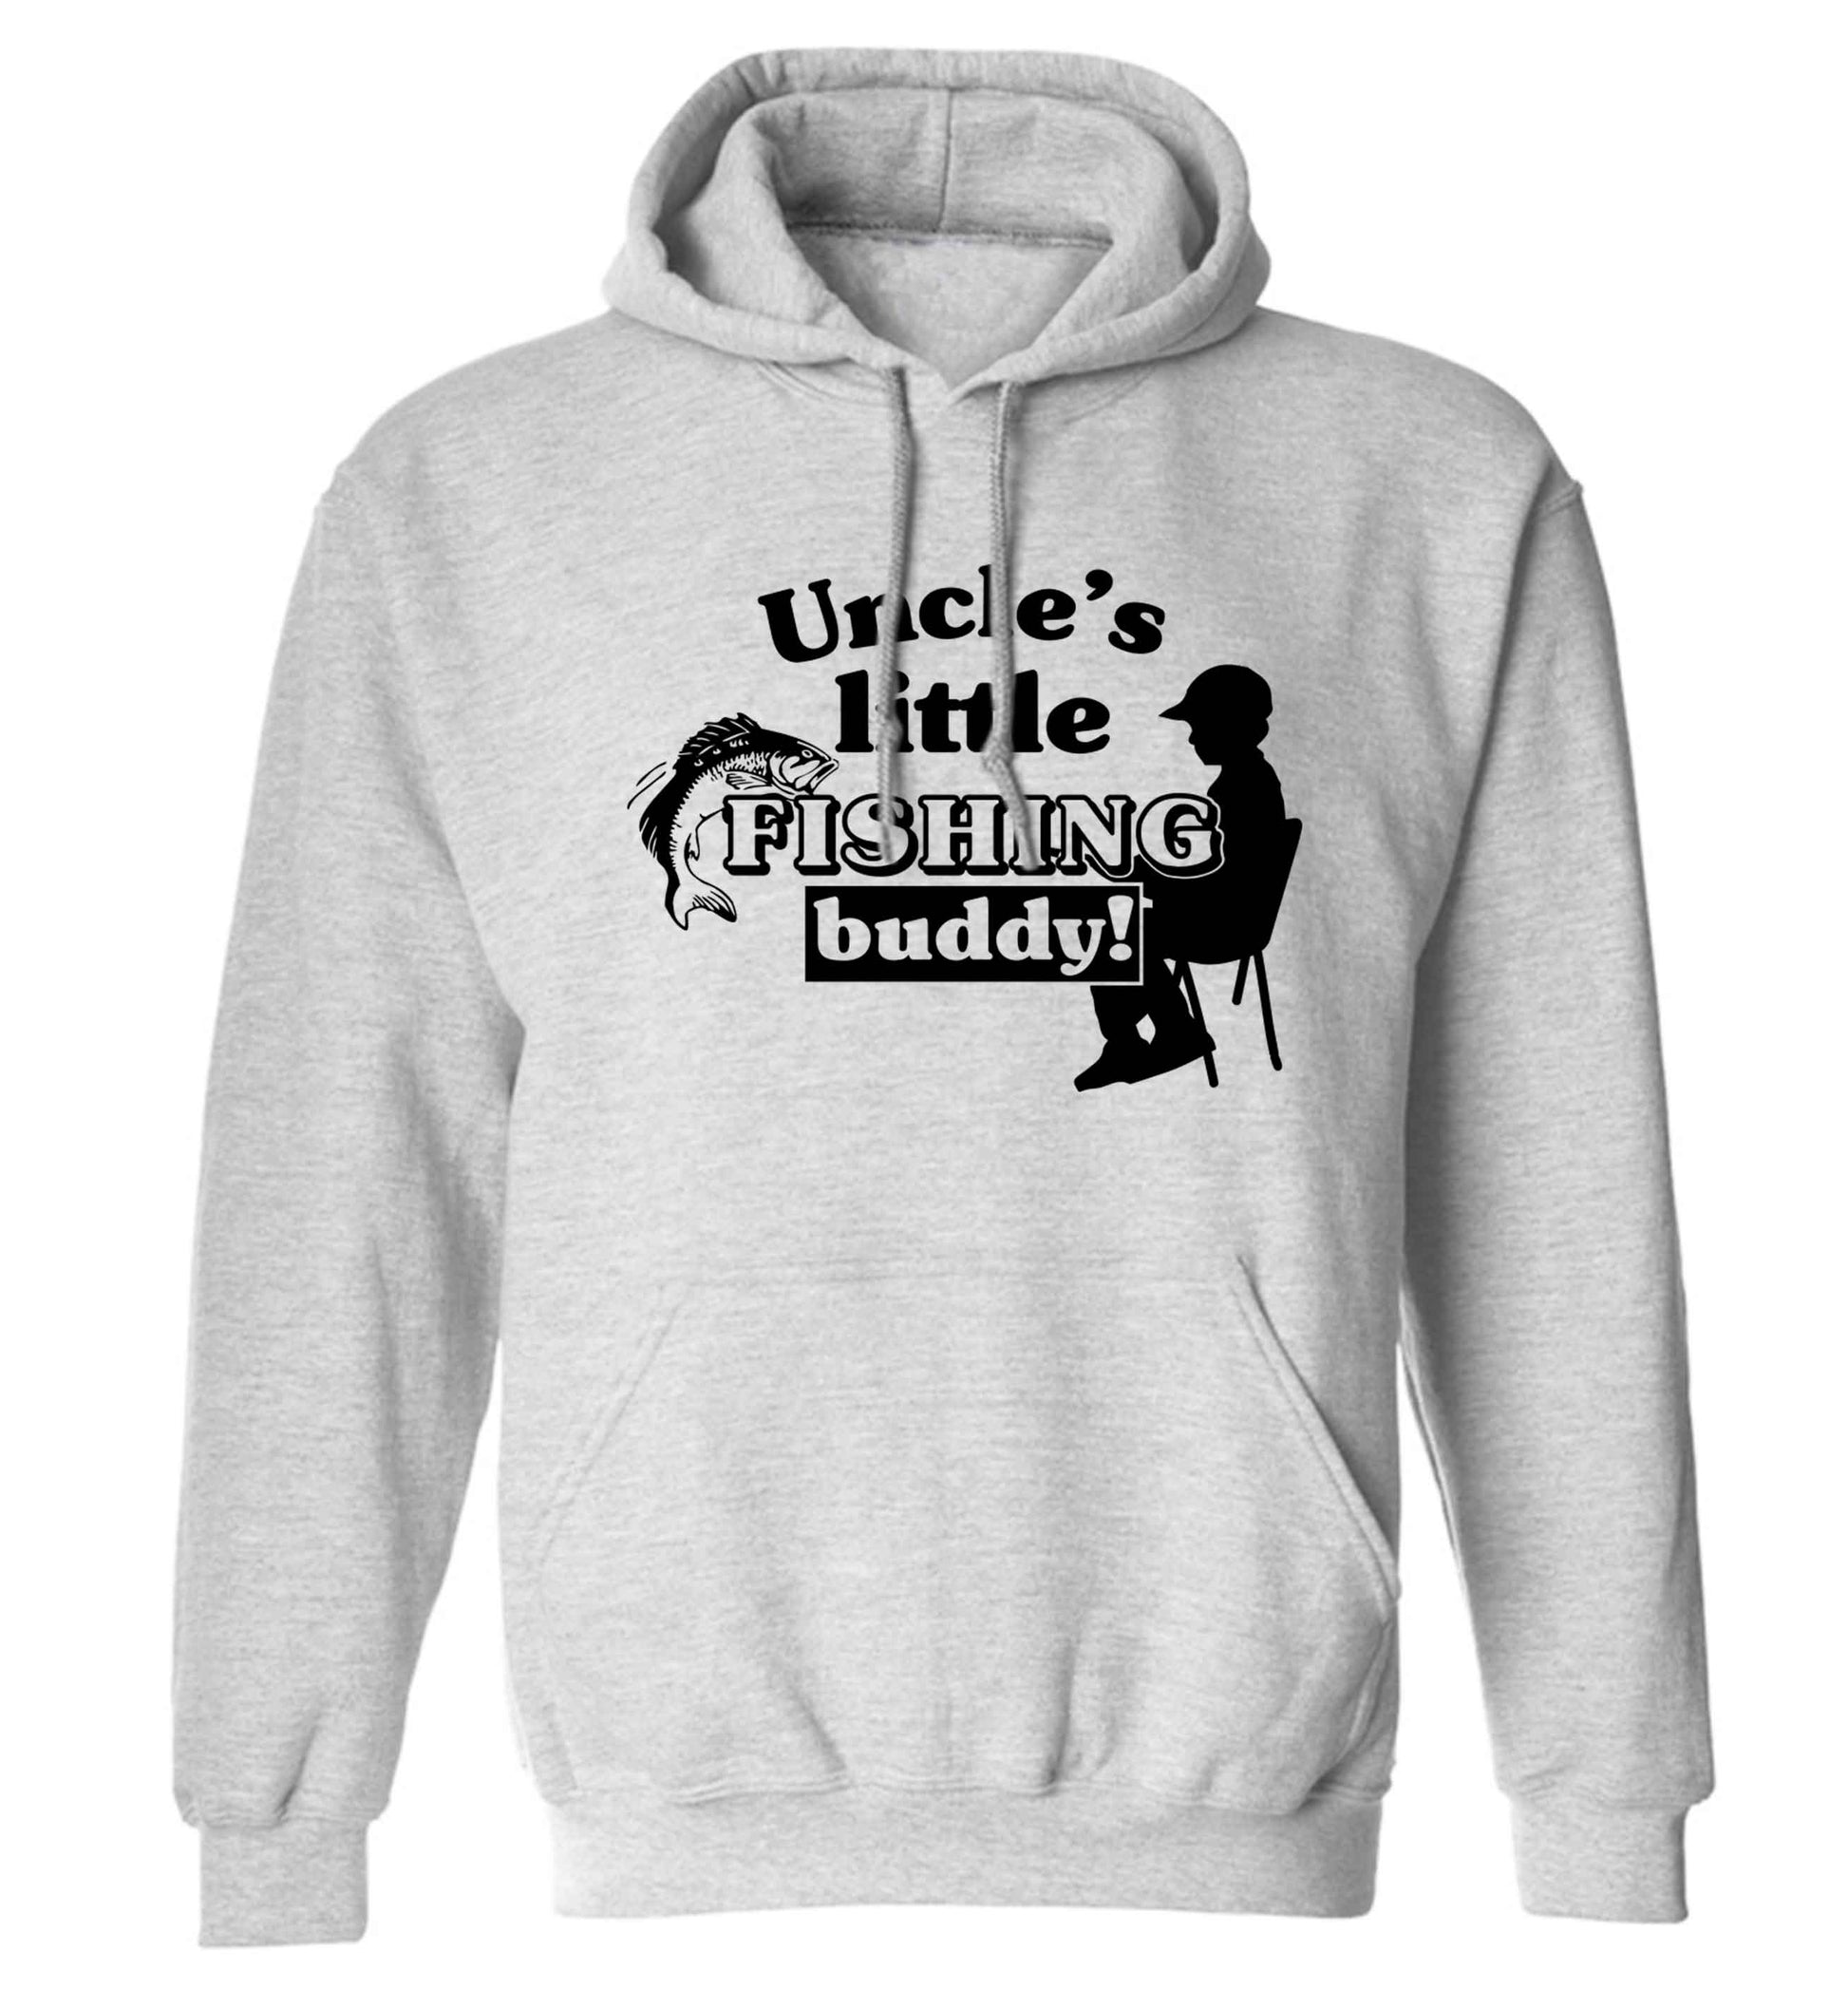 Uncle's little fishing buddy adults unisex grey hoodie 2XL